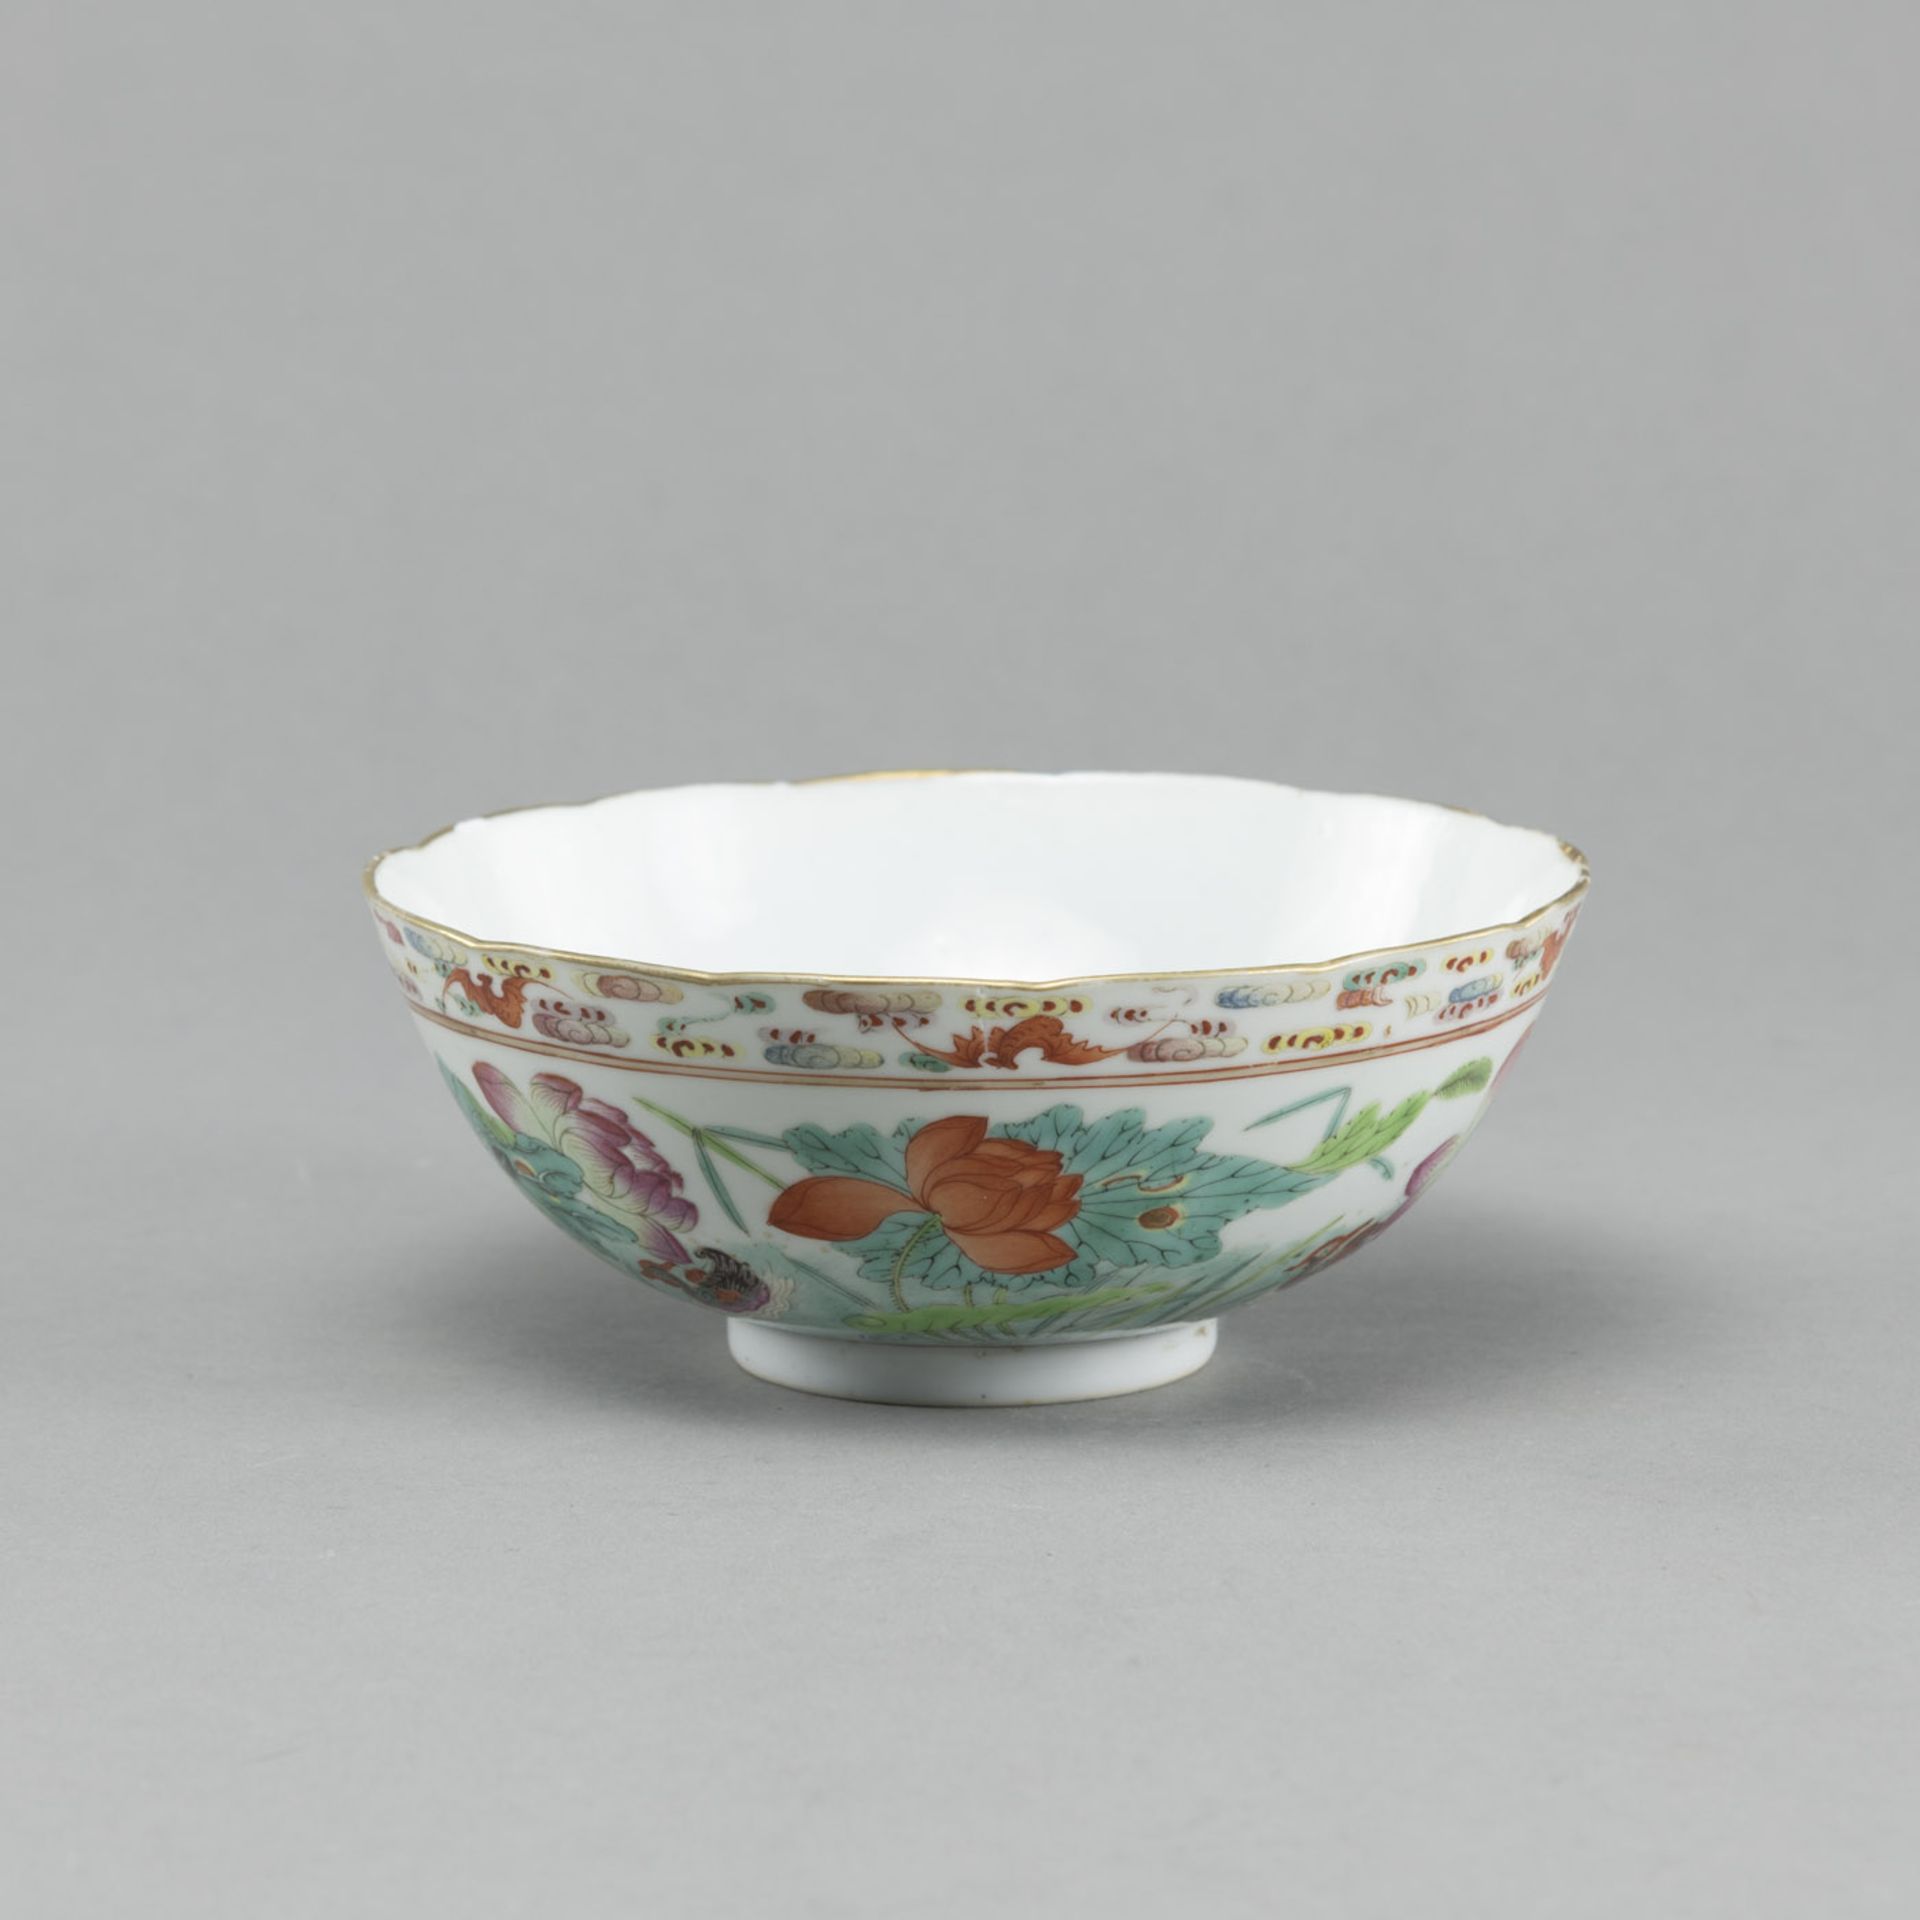 A 'FAMILLE ROSE' PORCELAIN BOWL DEPICTING A LOTUS POND WITH DUCKS - Image 5 of 8